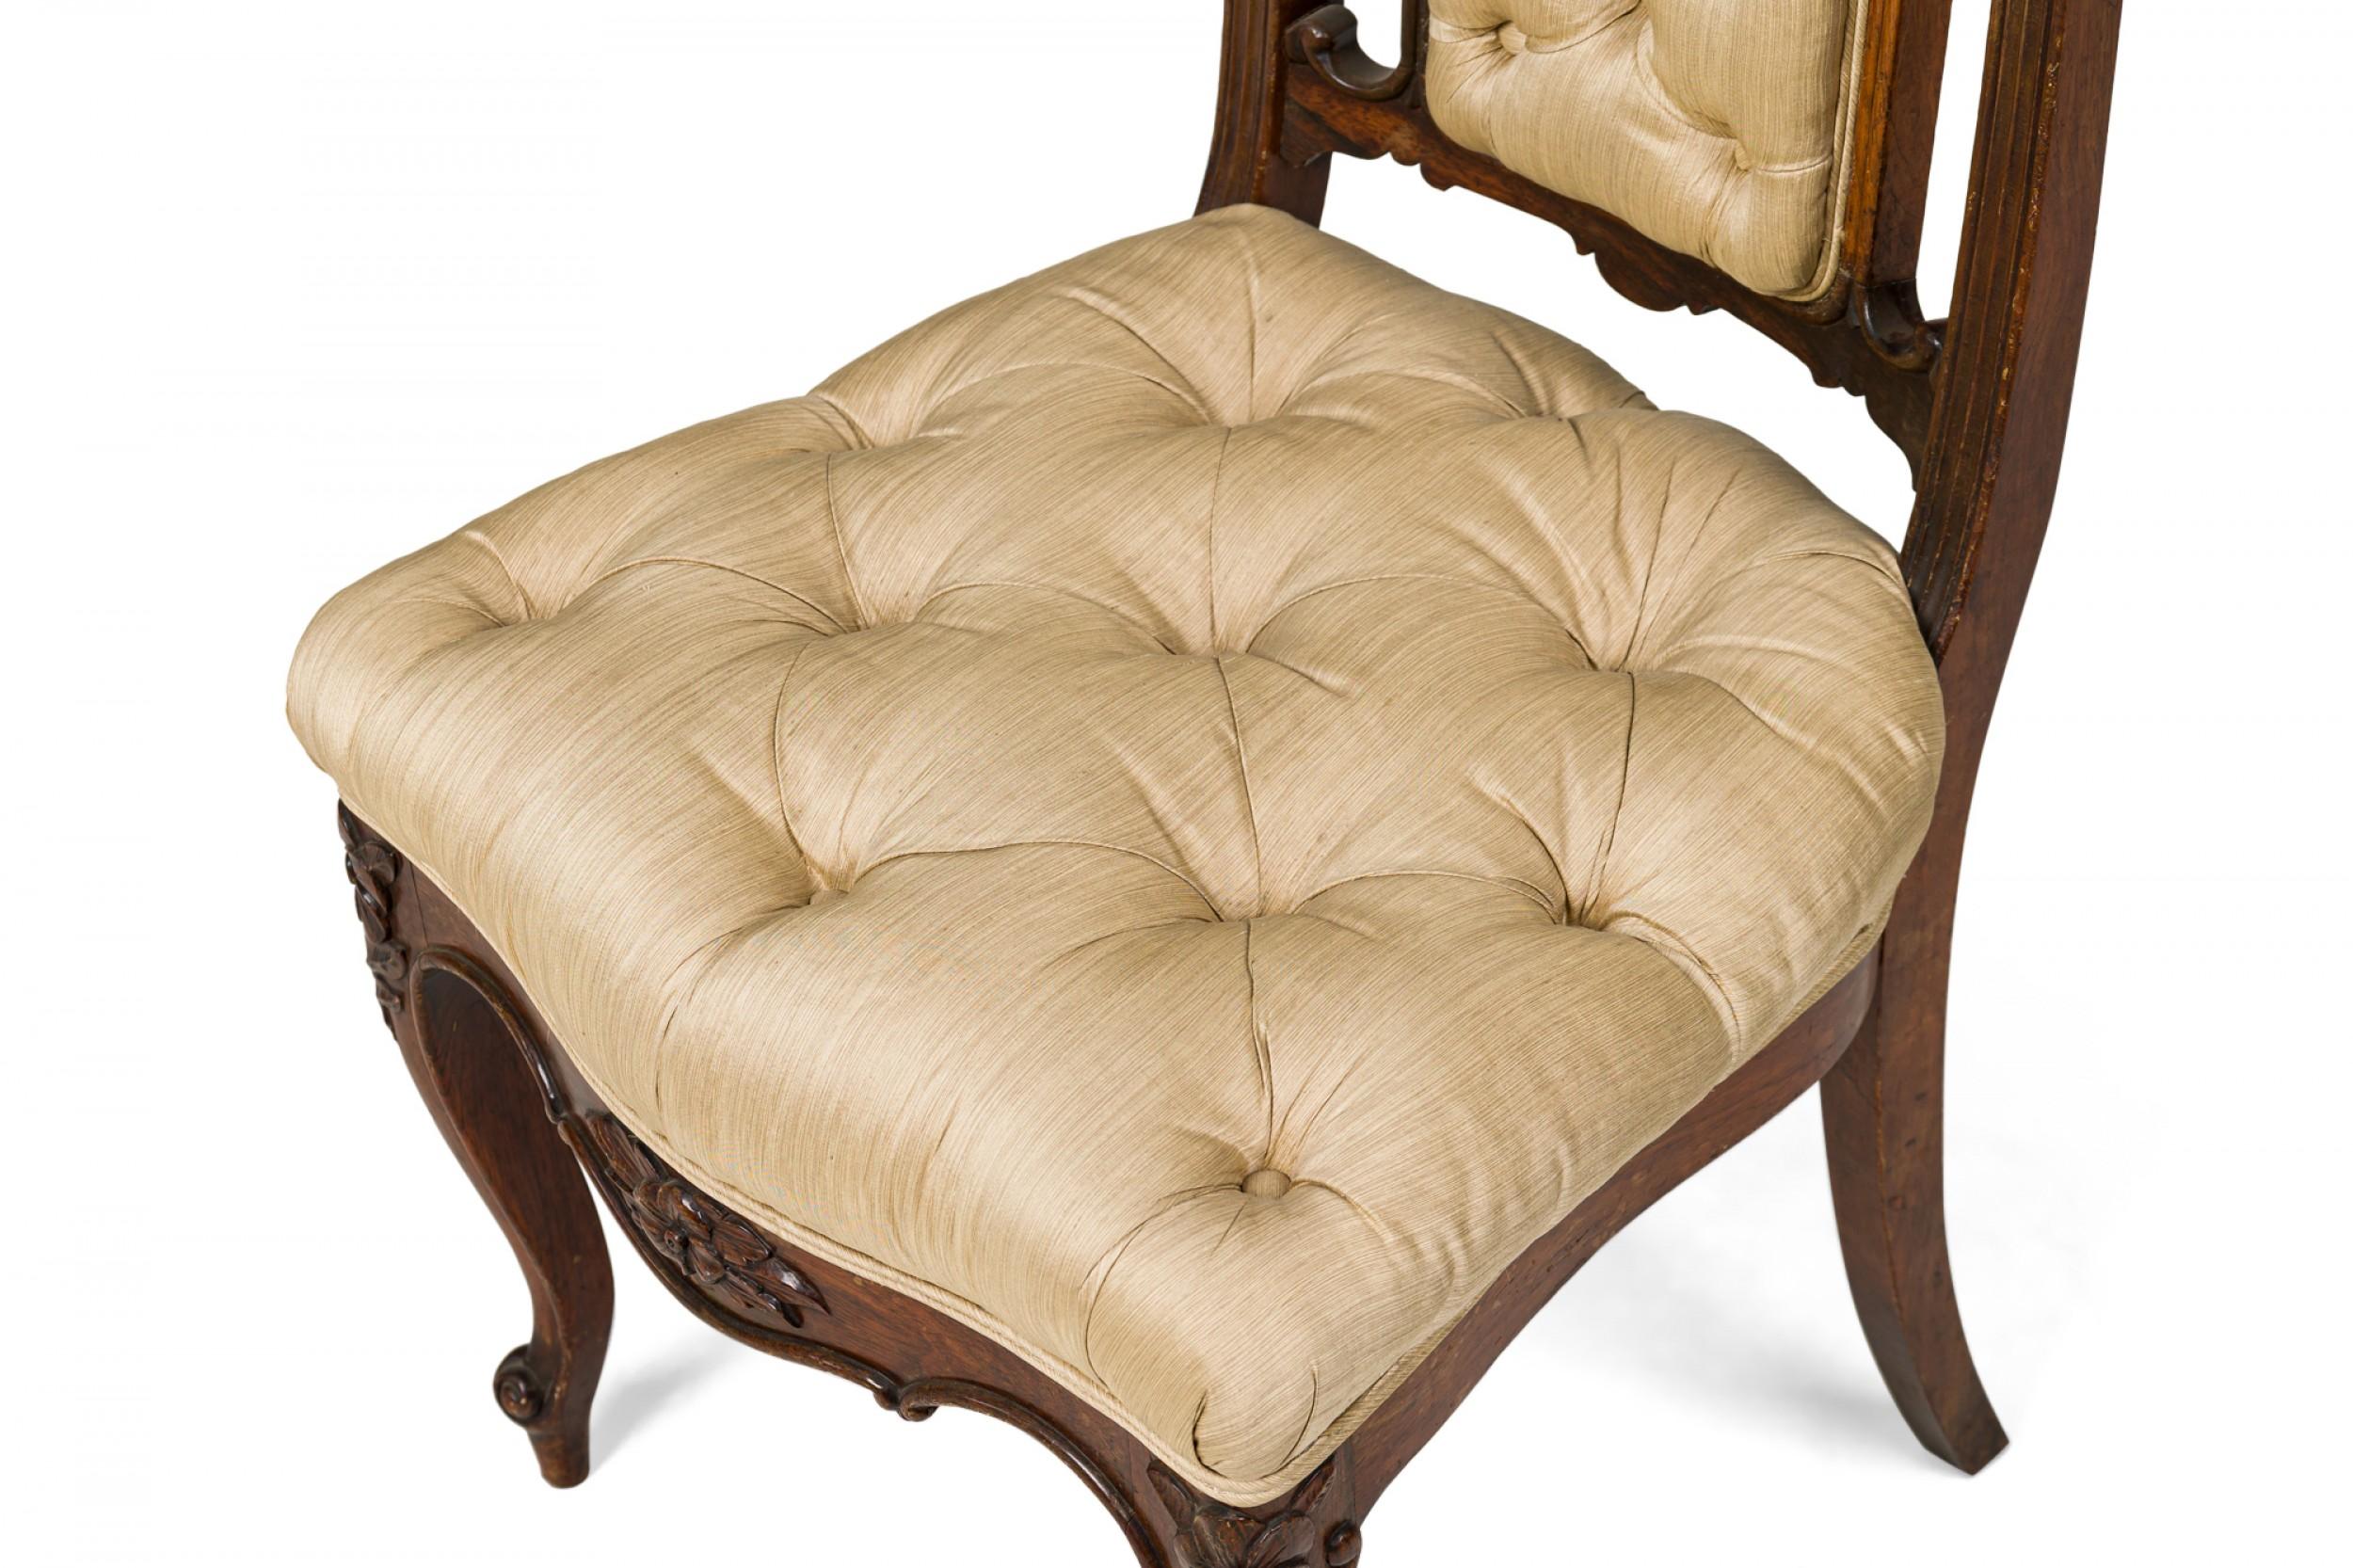 Set of 4 French Louis XV-Style Mahogany & Beige Tufted Upholstered Side Chairs For Sale 3